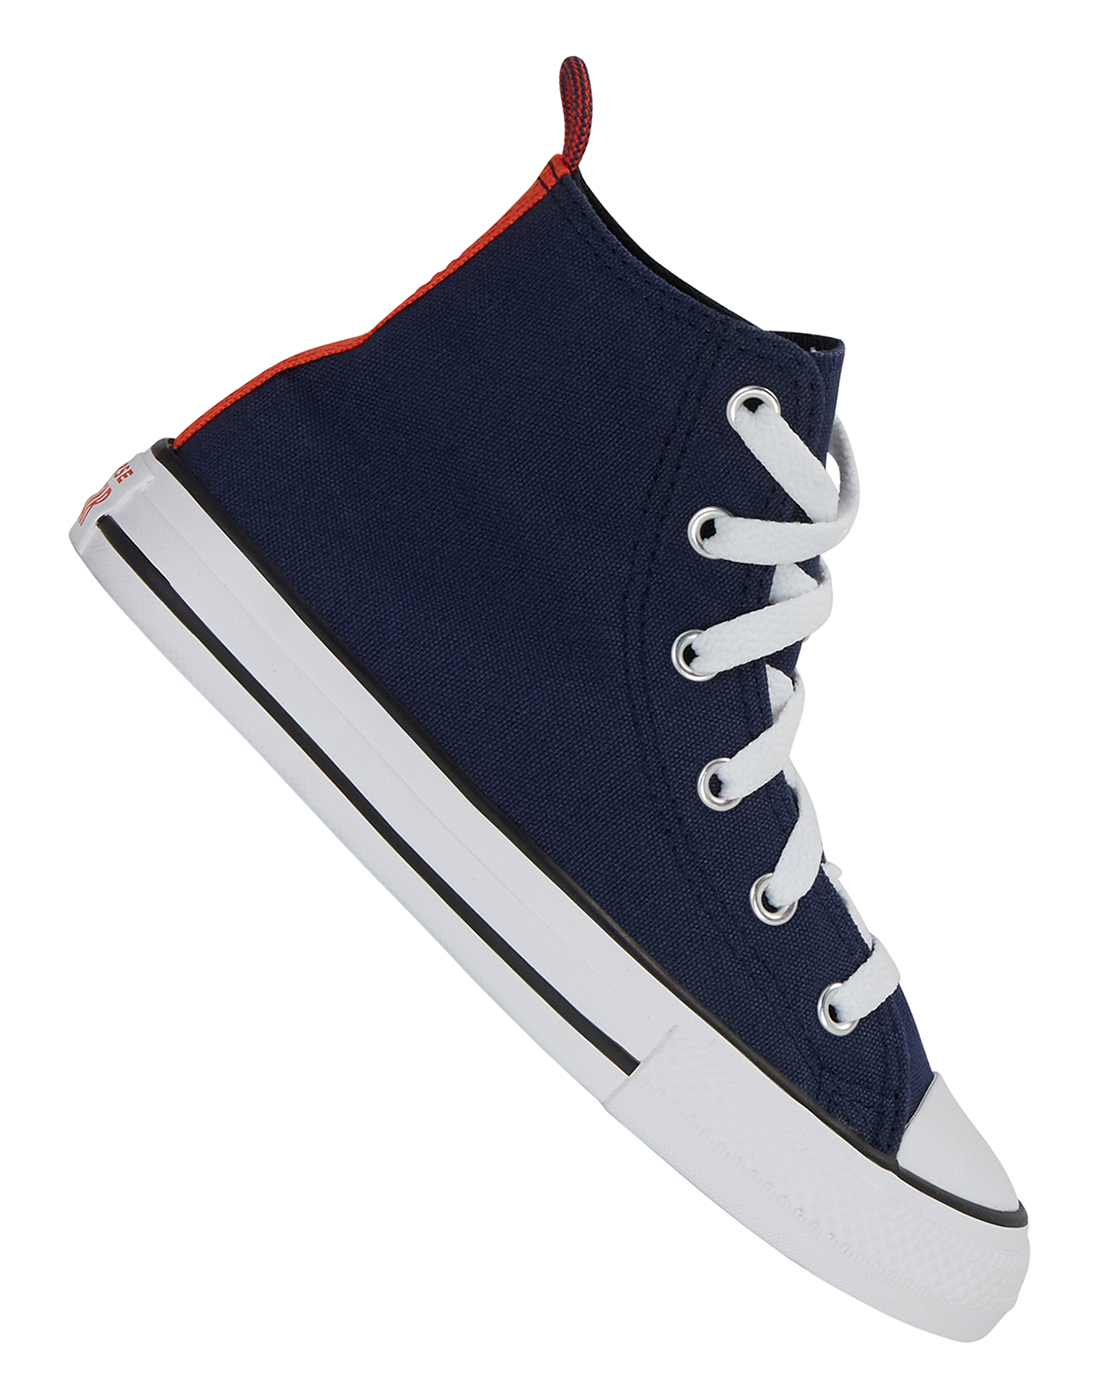 Converse Younger Kids Chuck Taylor All Star Summer Navy Roblox Blue Adidas Pants Template Free Full Length Eu - red roblox adidas pants